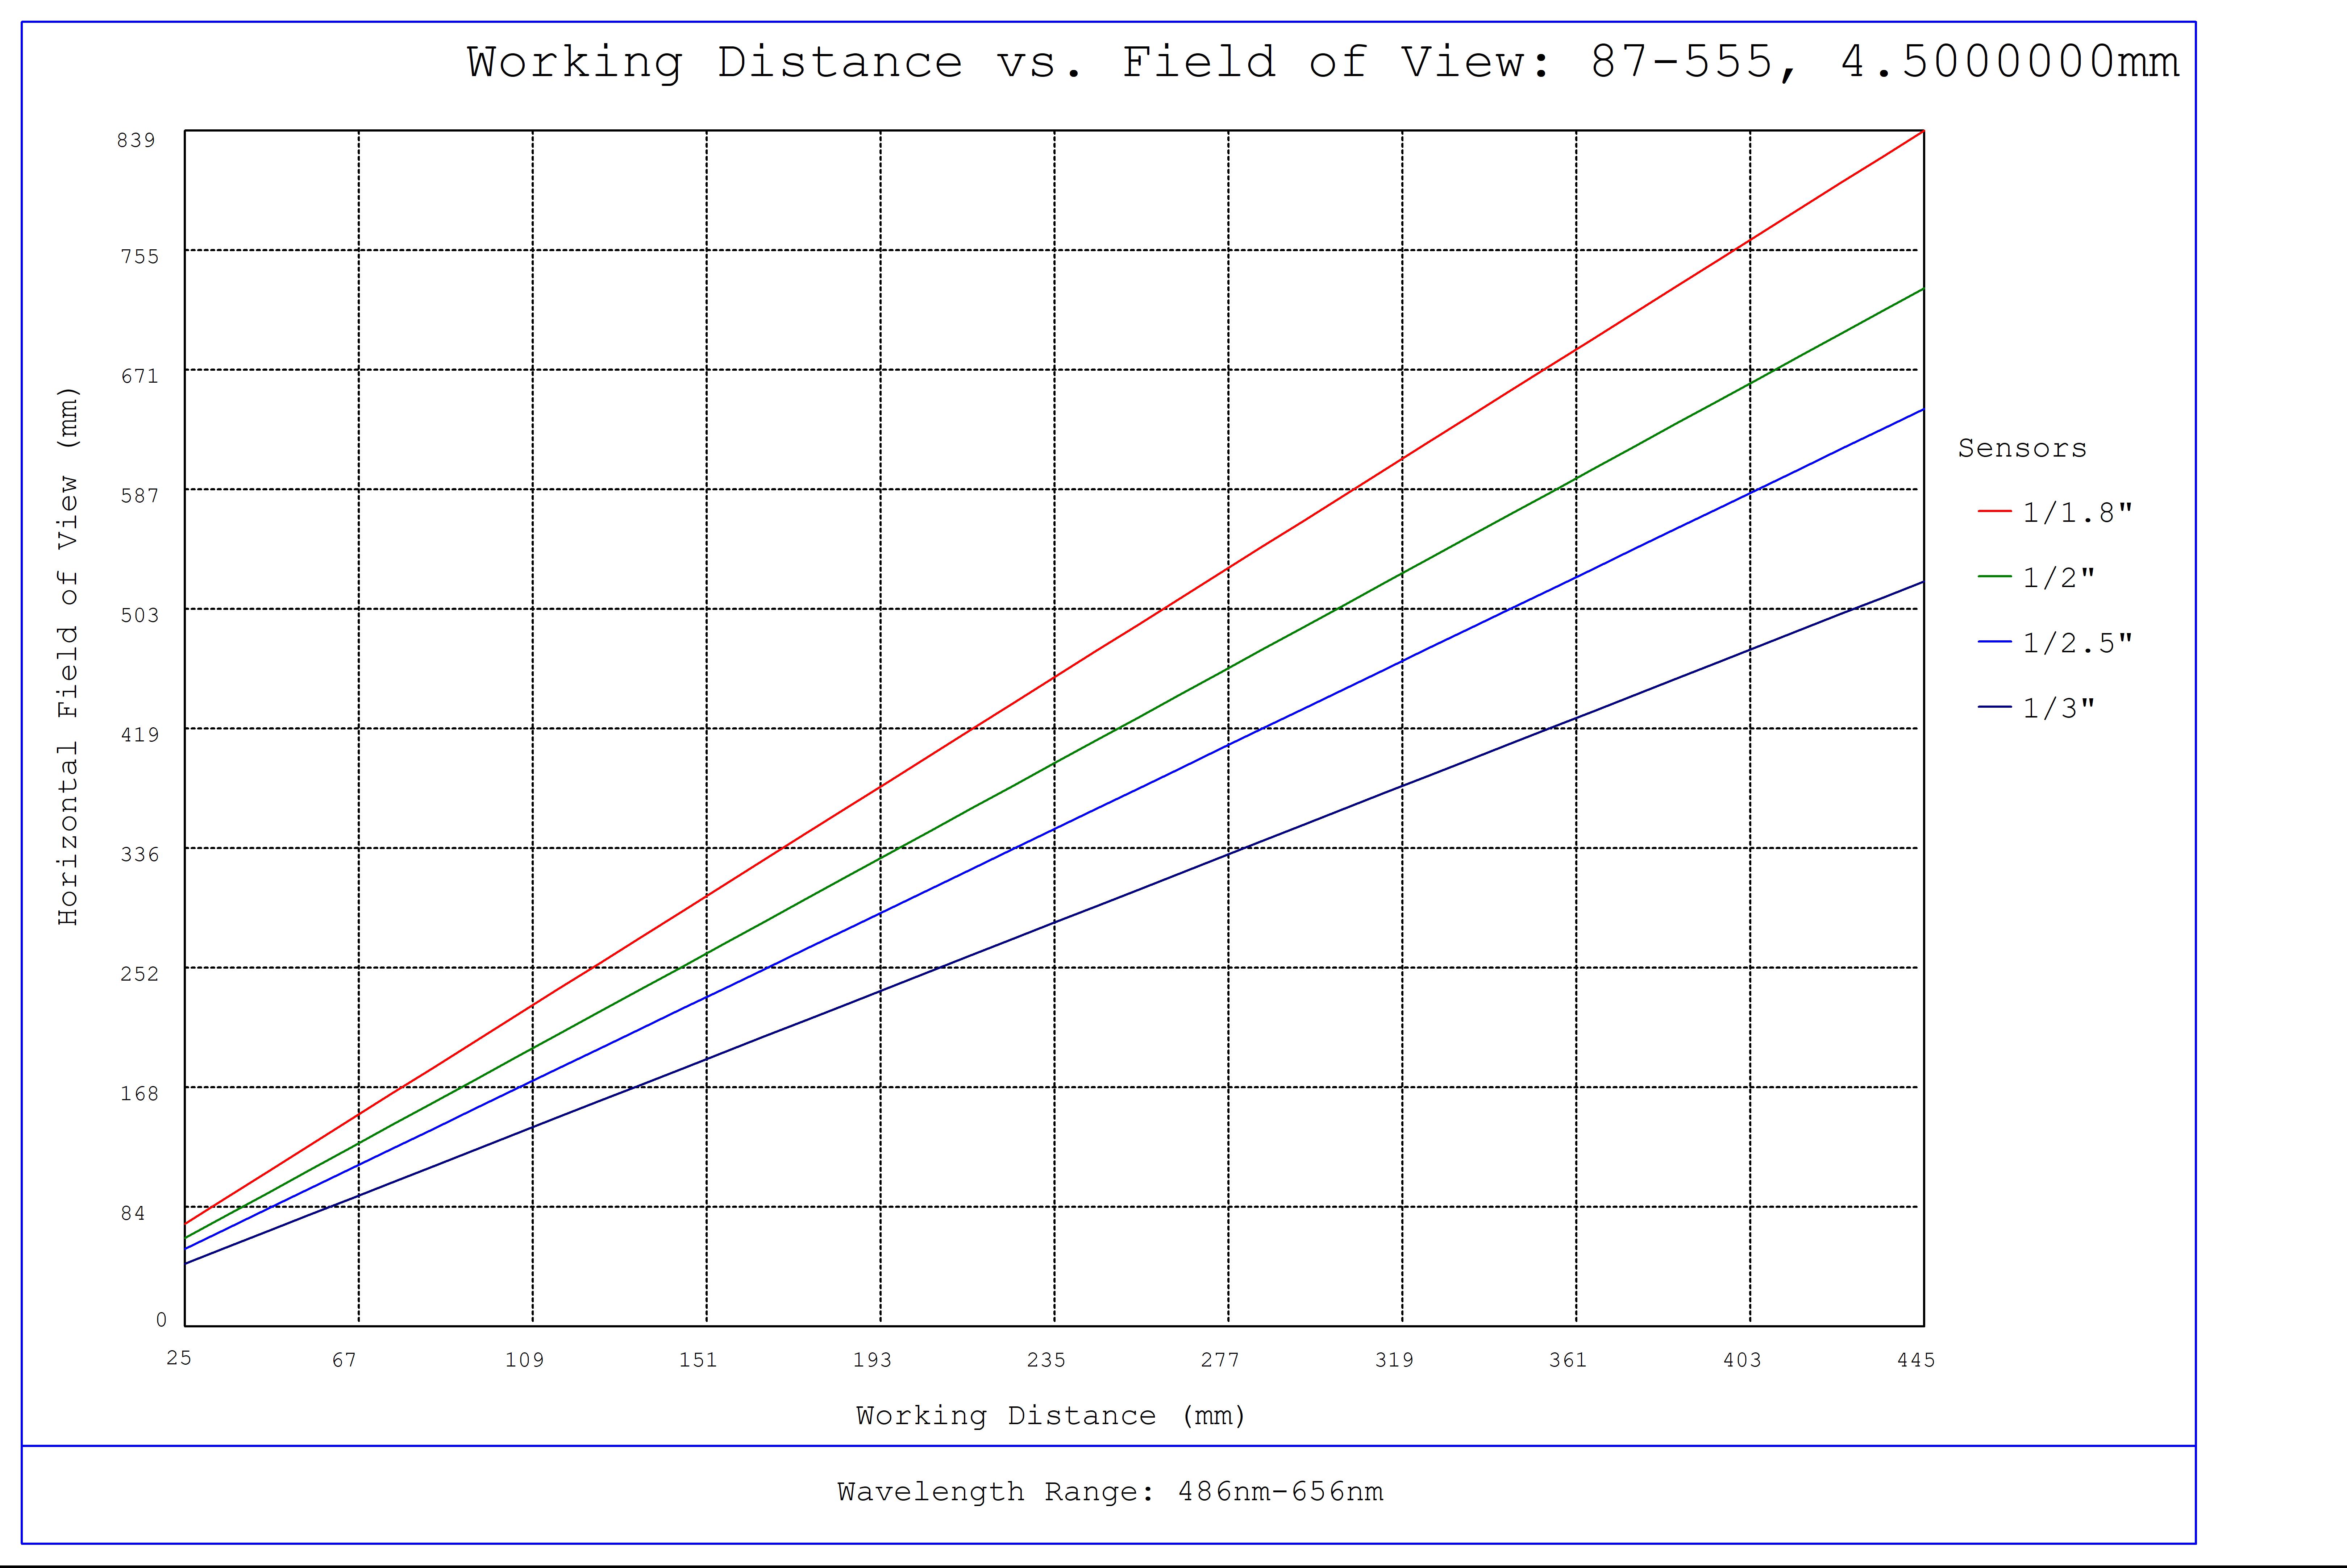 #87-555, 4.5mm, f/8 Ci Series Fixed Focal Length Lens, Working Distance versus Field of View Plot